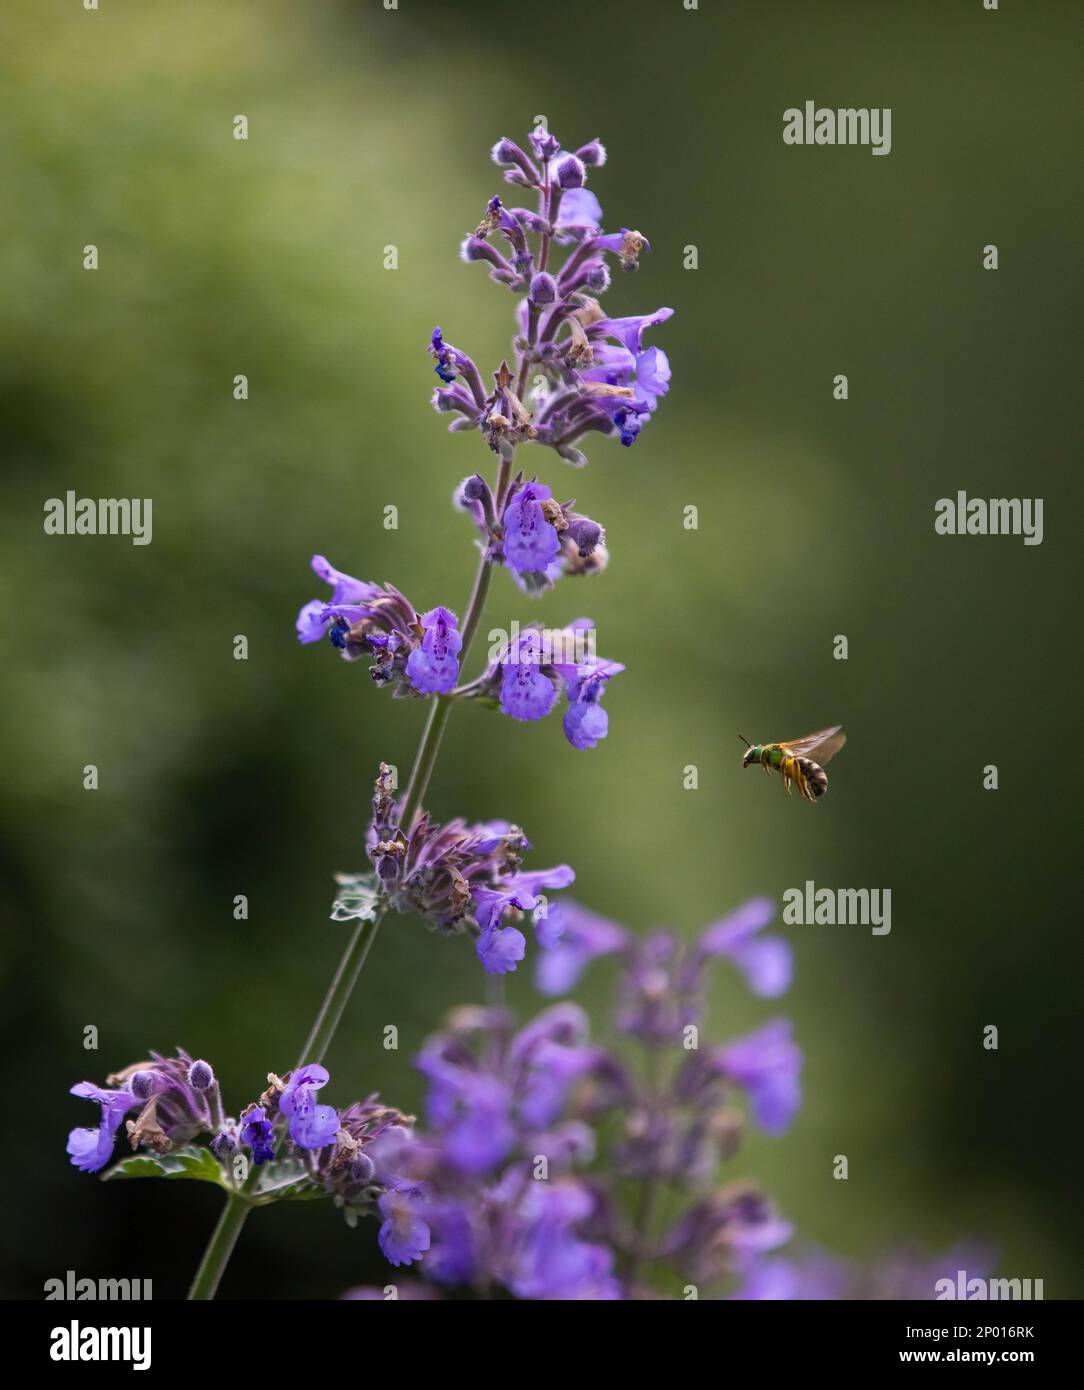 A bee flying around a purple catmint flower. Stock Photo